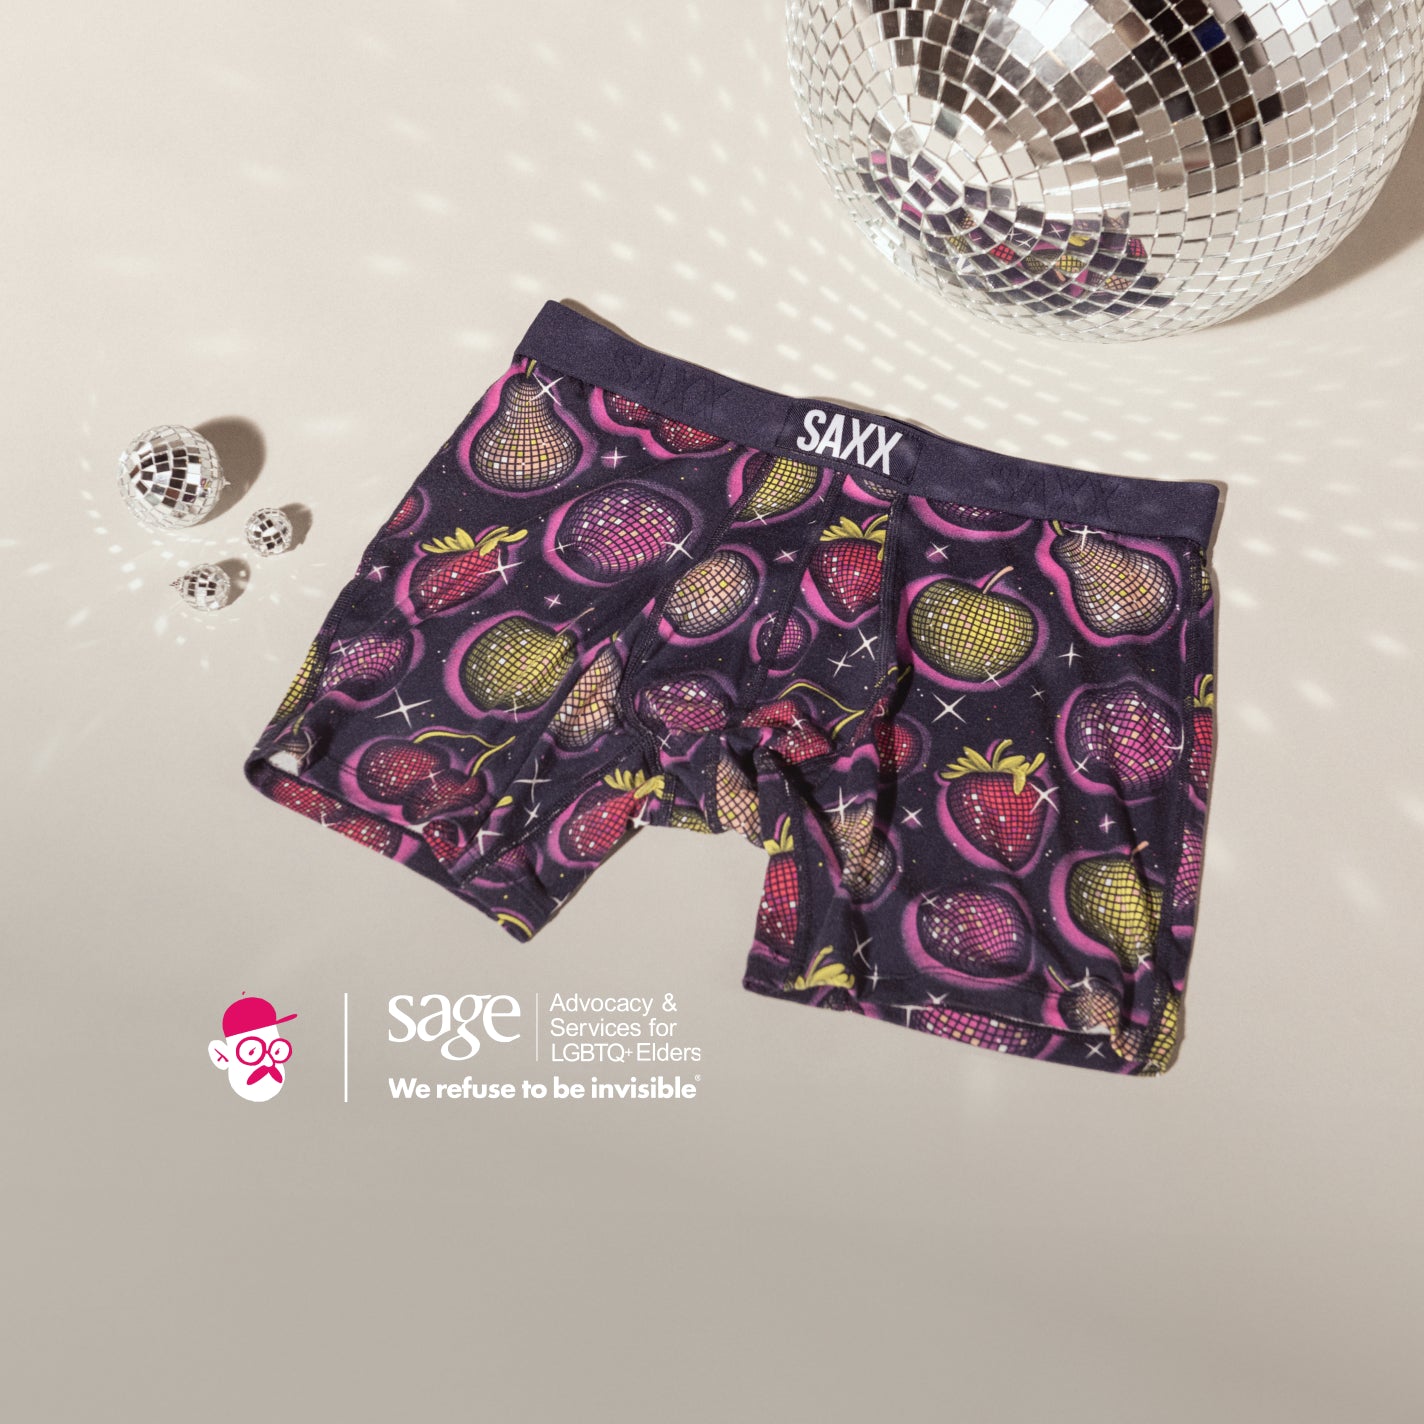 SAXX and artist Kyle Letendre logos overlaying a photo of disco balls surrounding purple boxer briefs in a fruit print